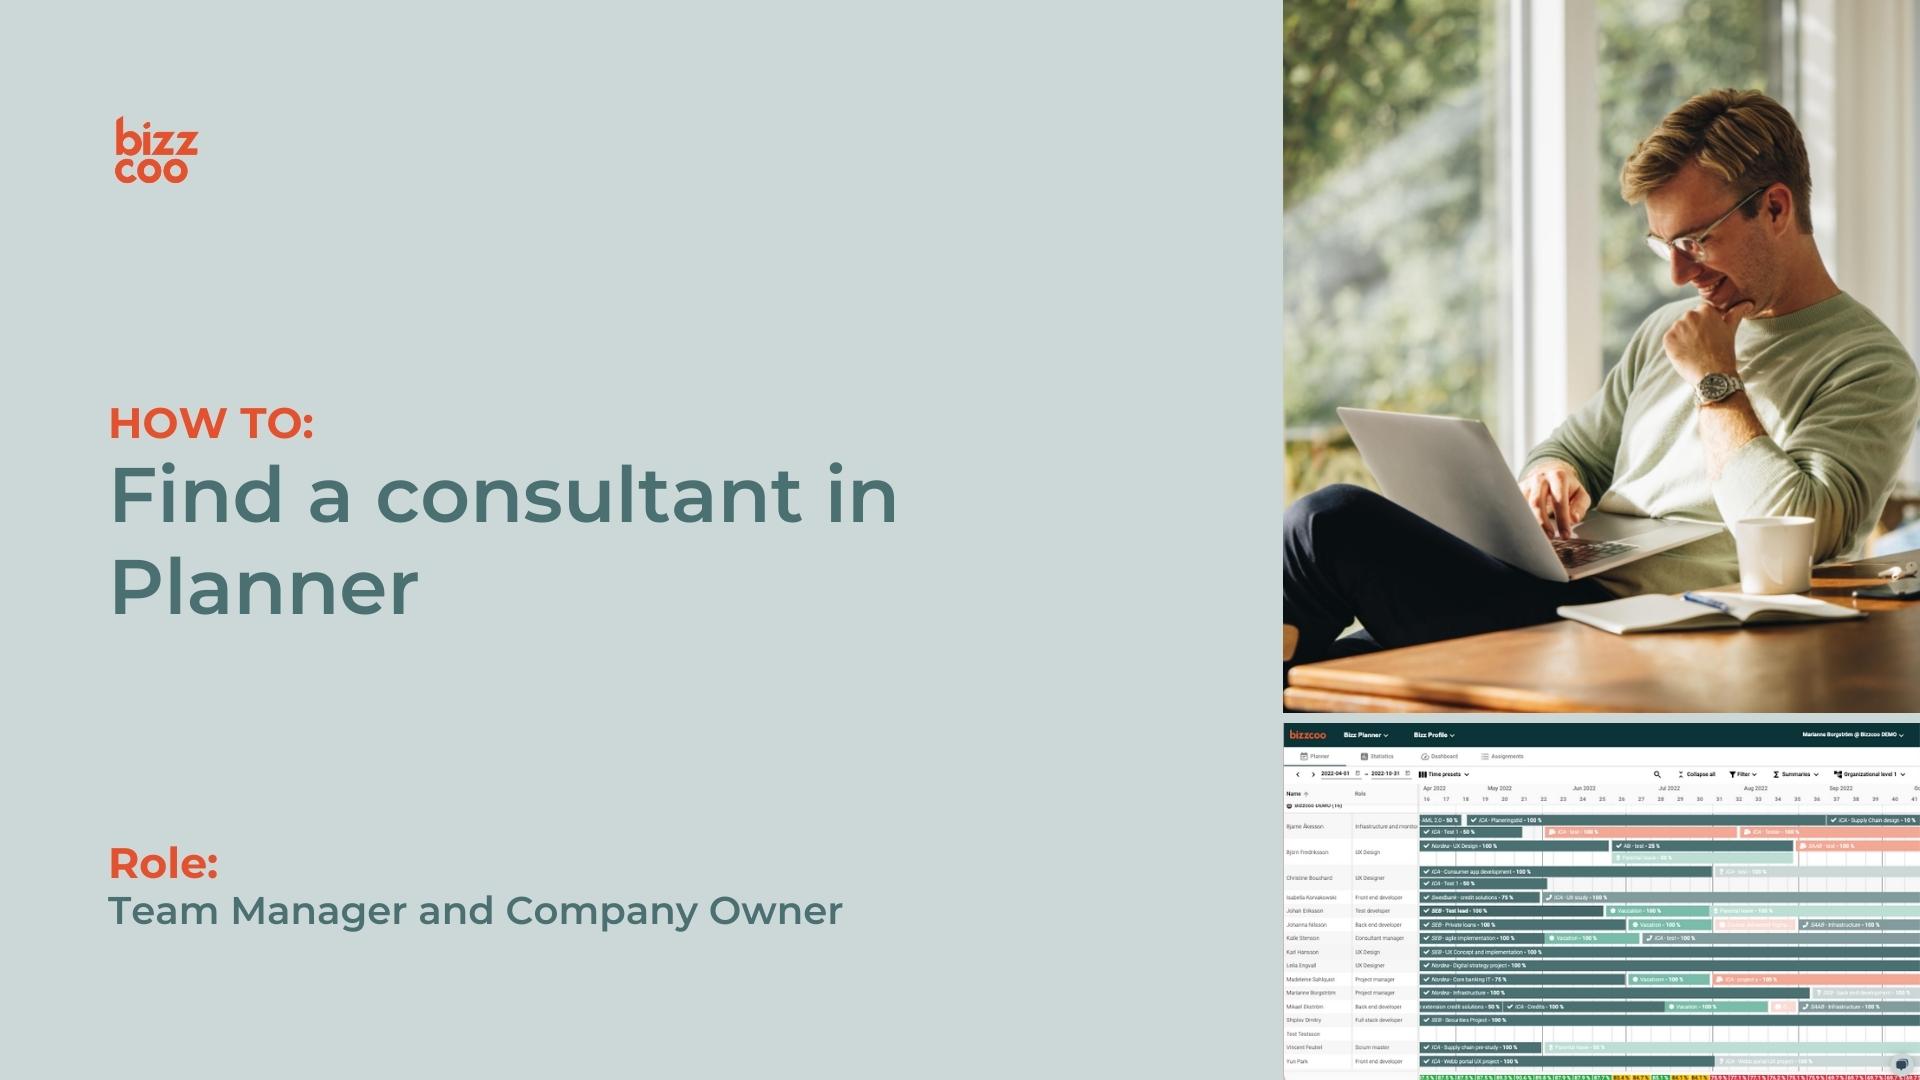 Find a consultant in Planner